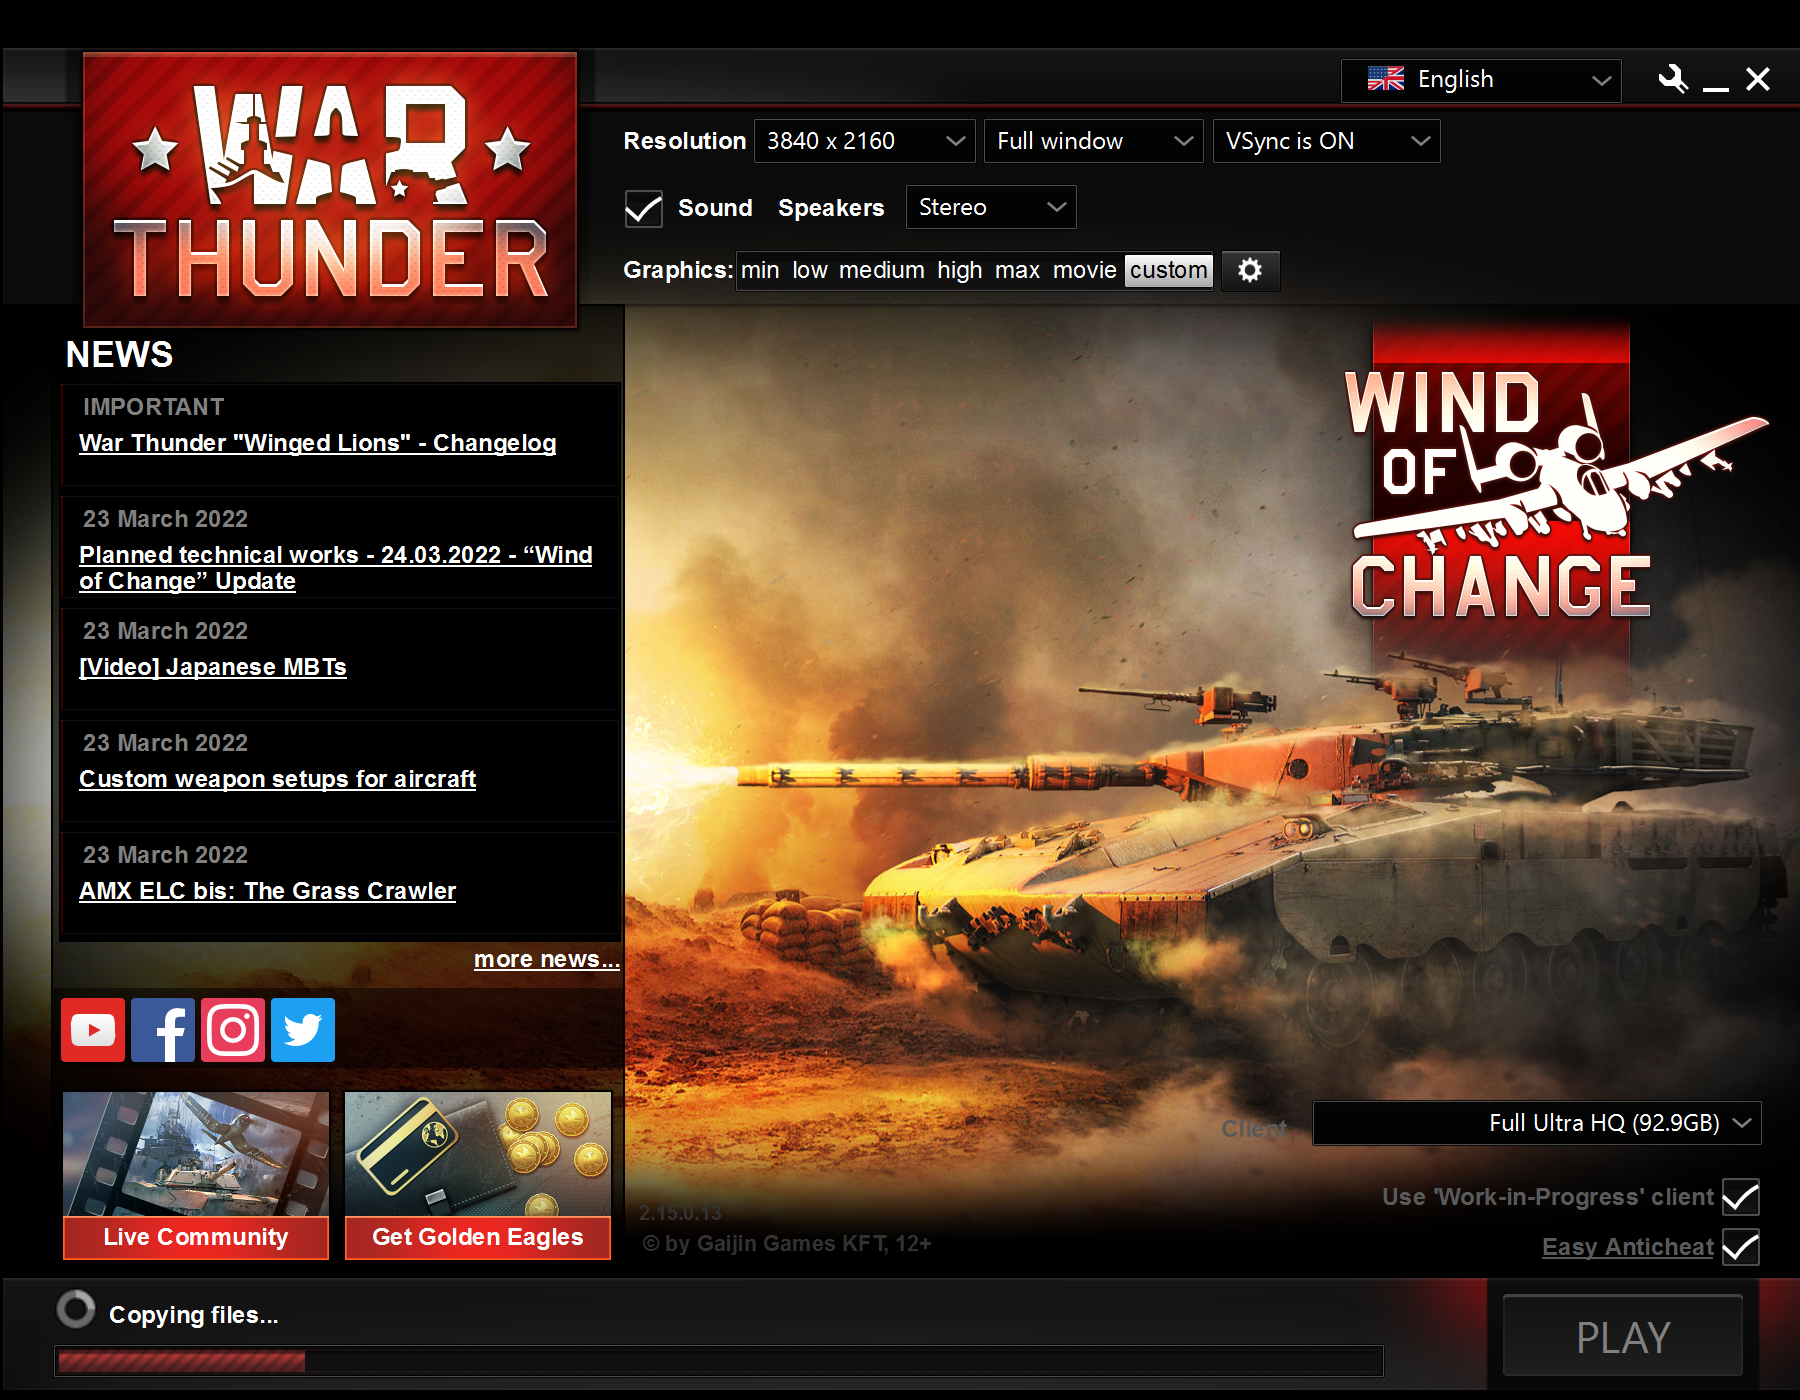 Launch the War Thunder launcher
If an update is available, it will be automatically downloaded and installed